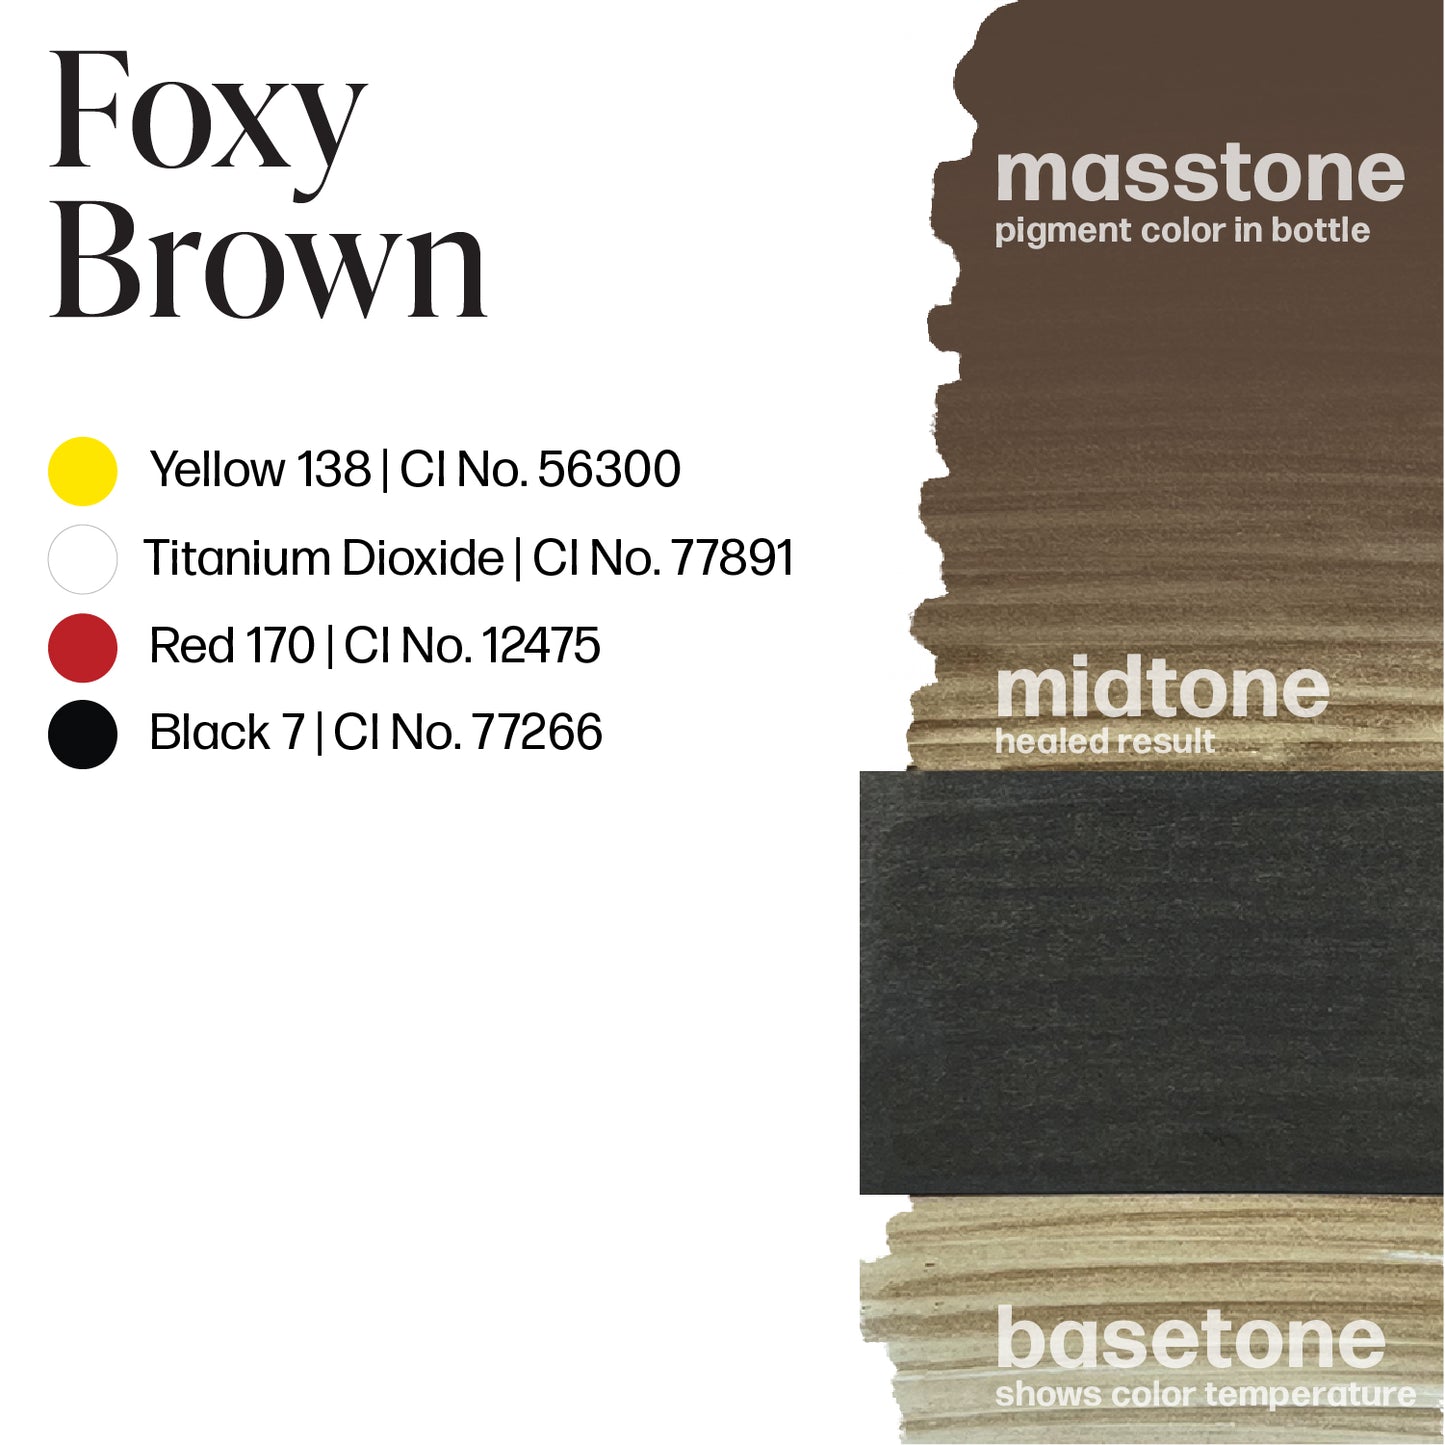 Perma Blend LUXE Foxy Brown